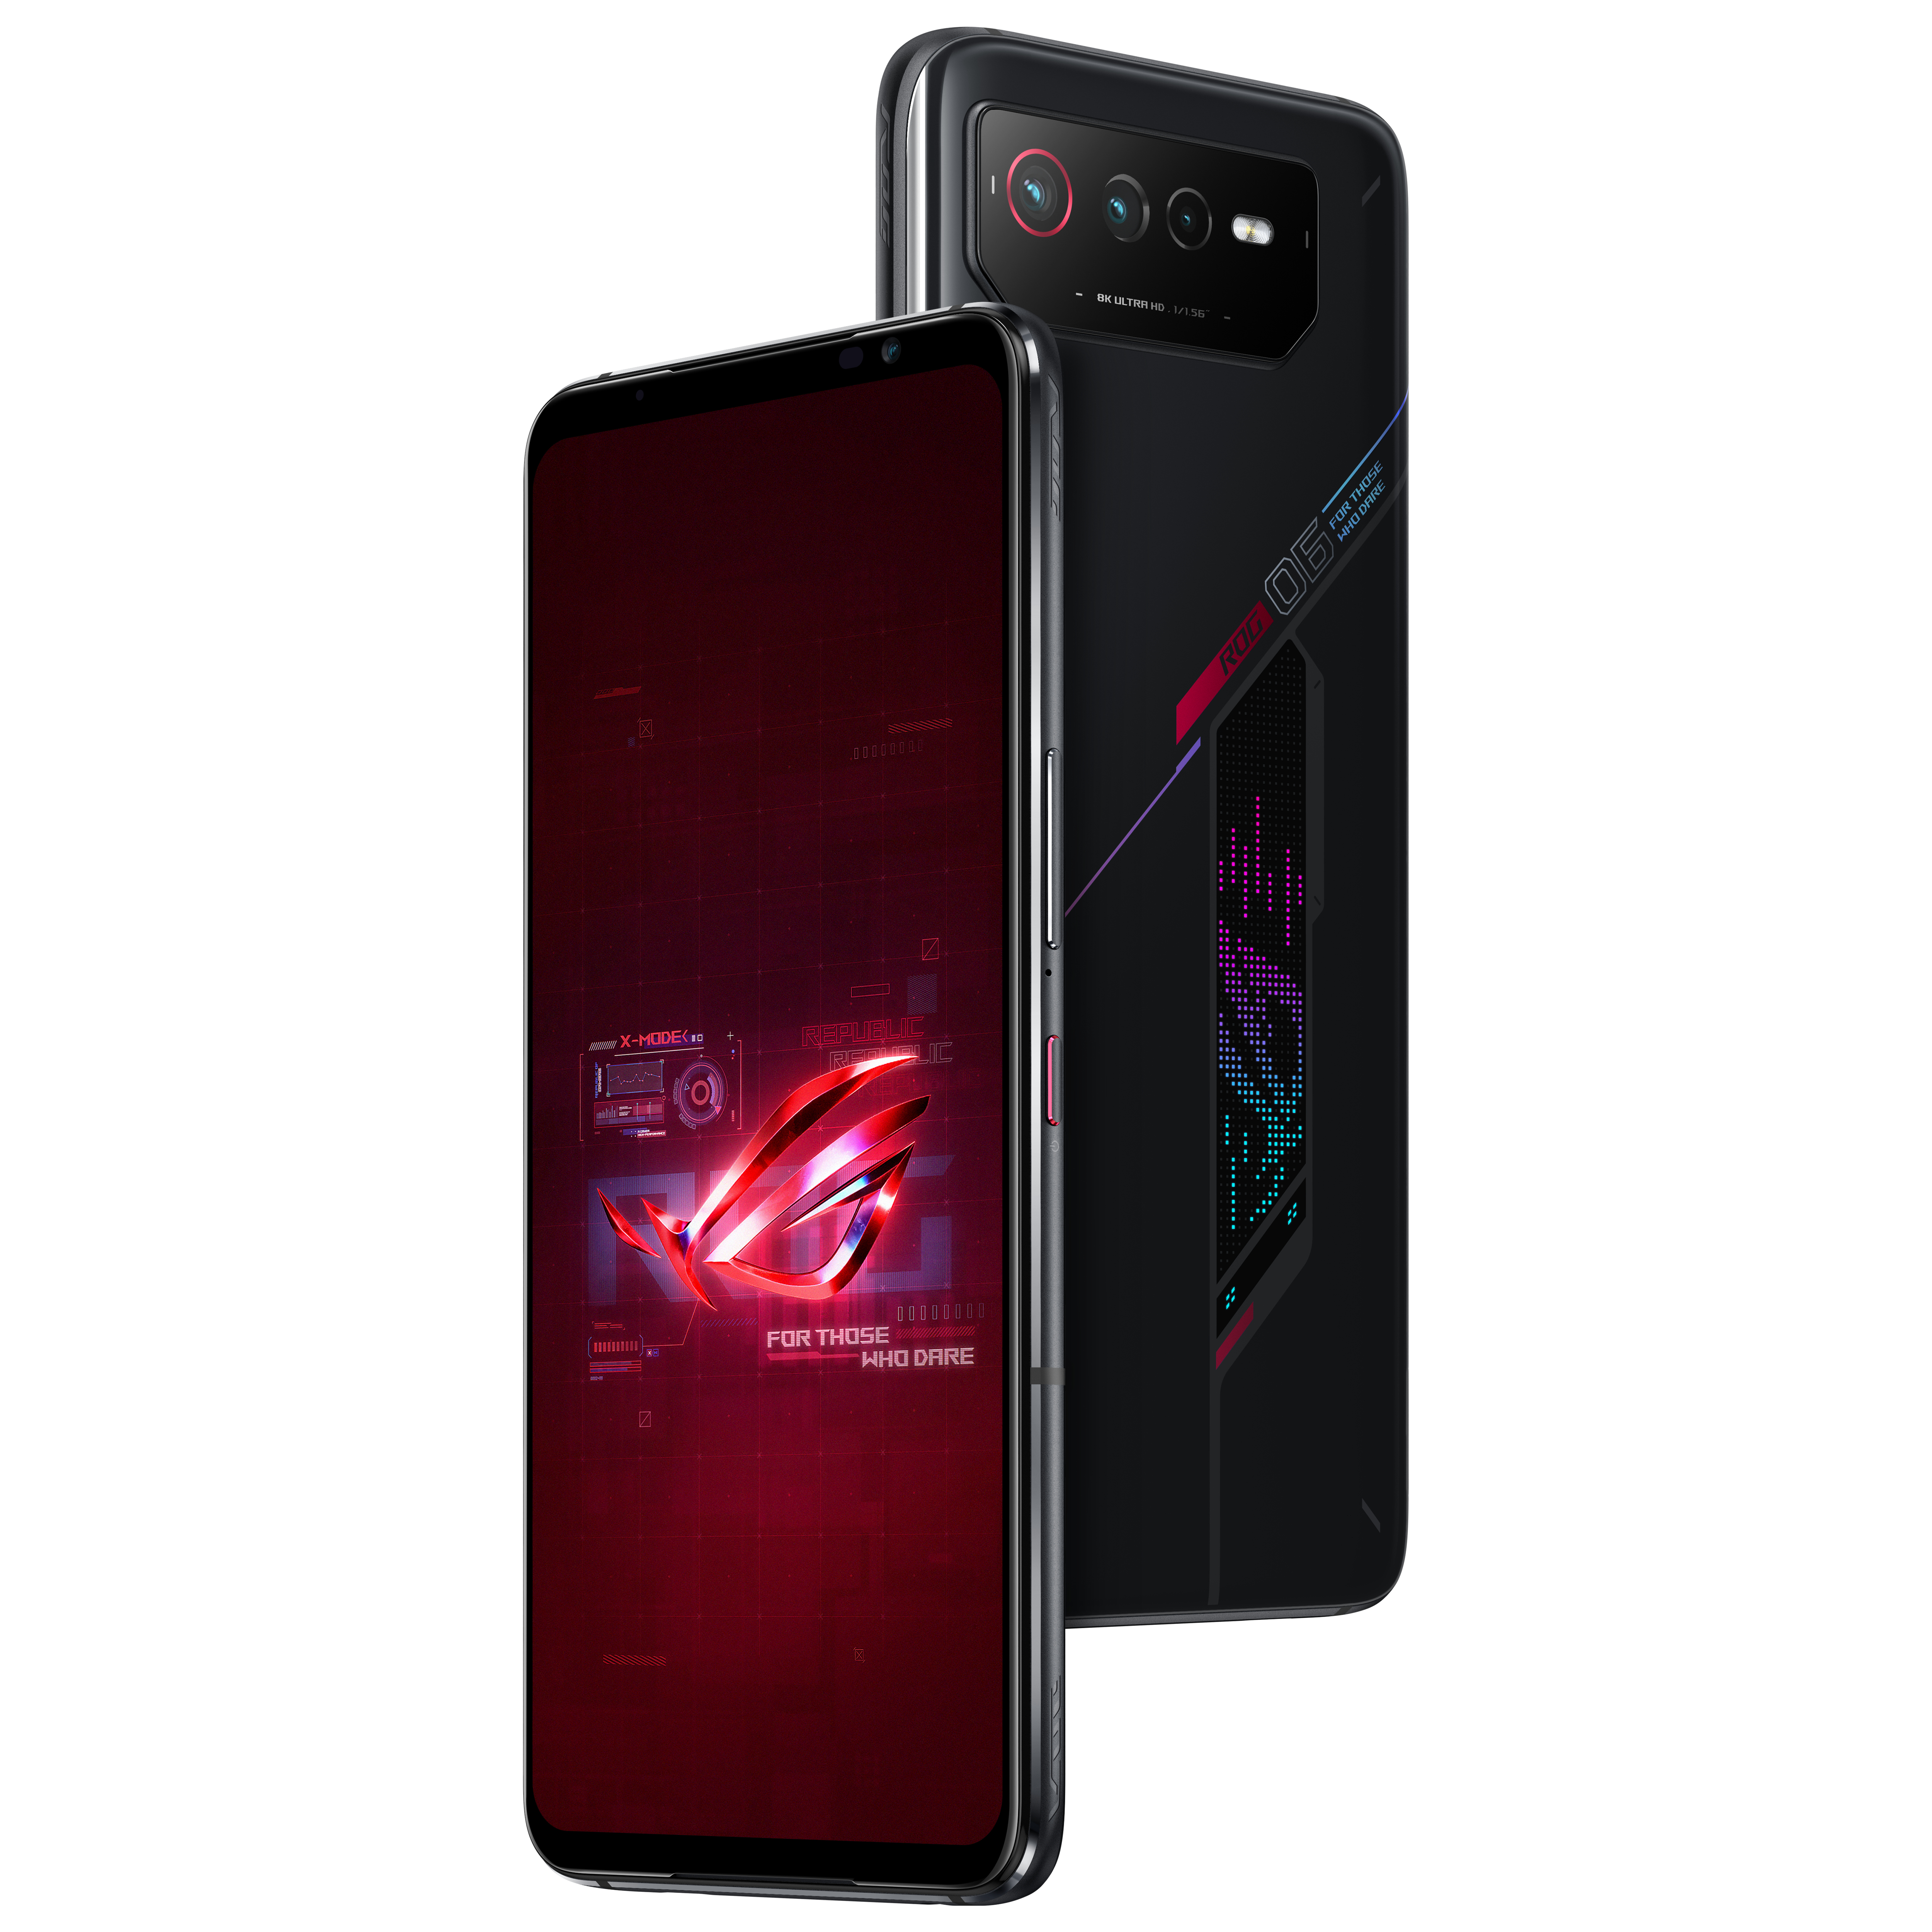 The ASUS ROG Phone 6 has a 'wireless' thermoelectric cooler add-on